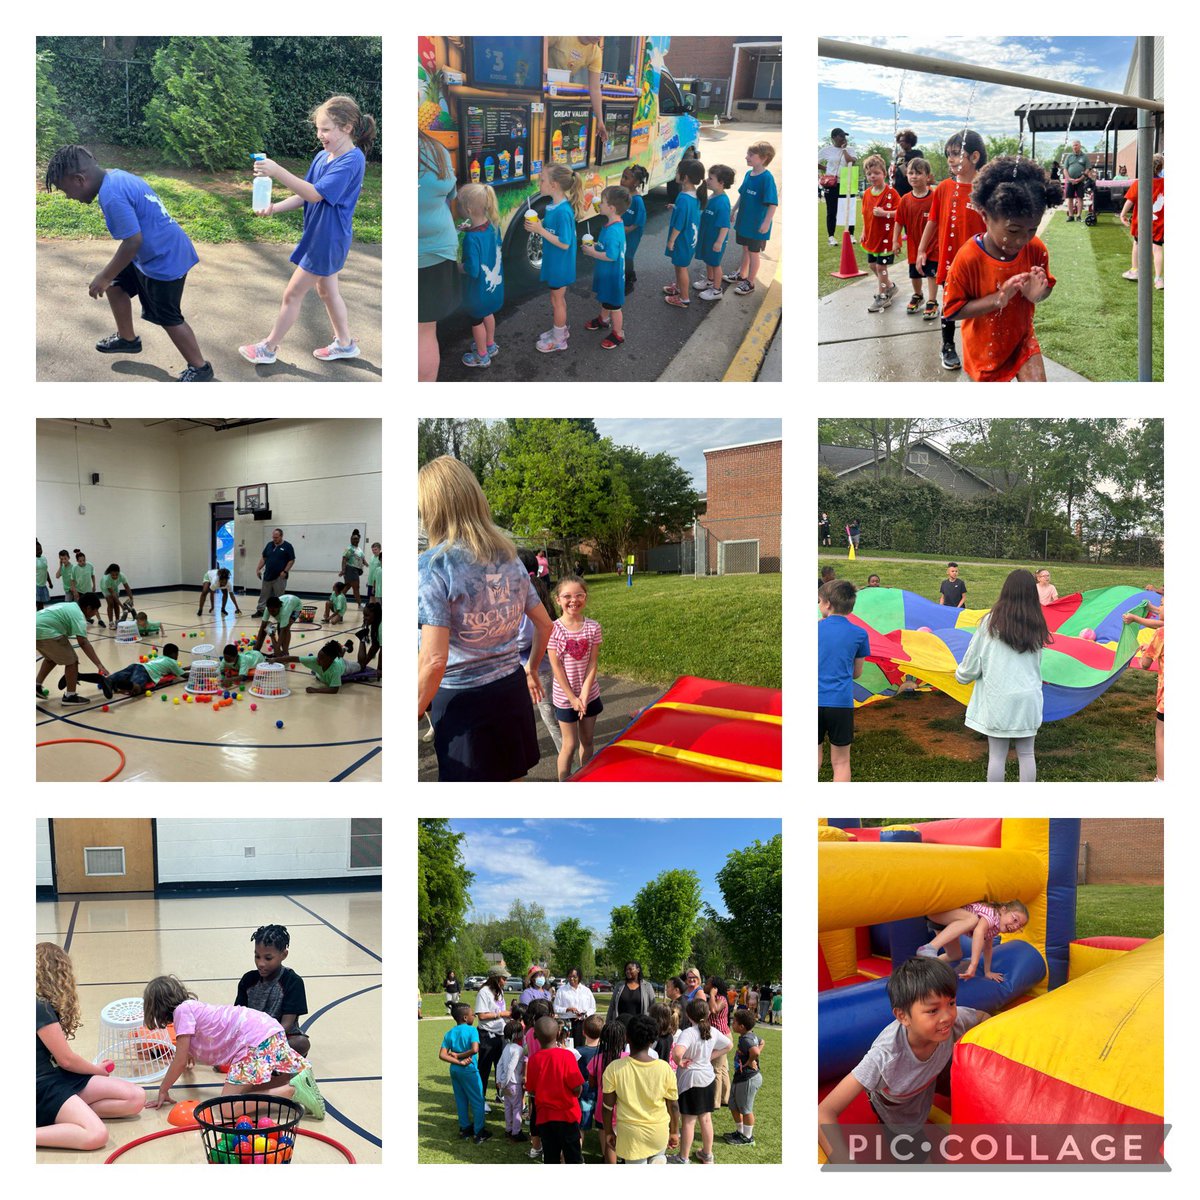 Our field day was amazing! Our Eagles had a blast!! Thanks Ms. Starnes for organizing things for our Eagles!! @RockHillSchools #EaglesEmerge